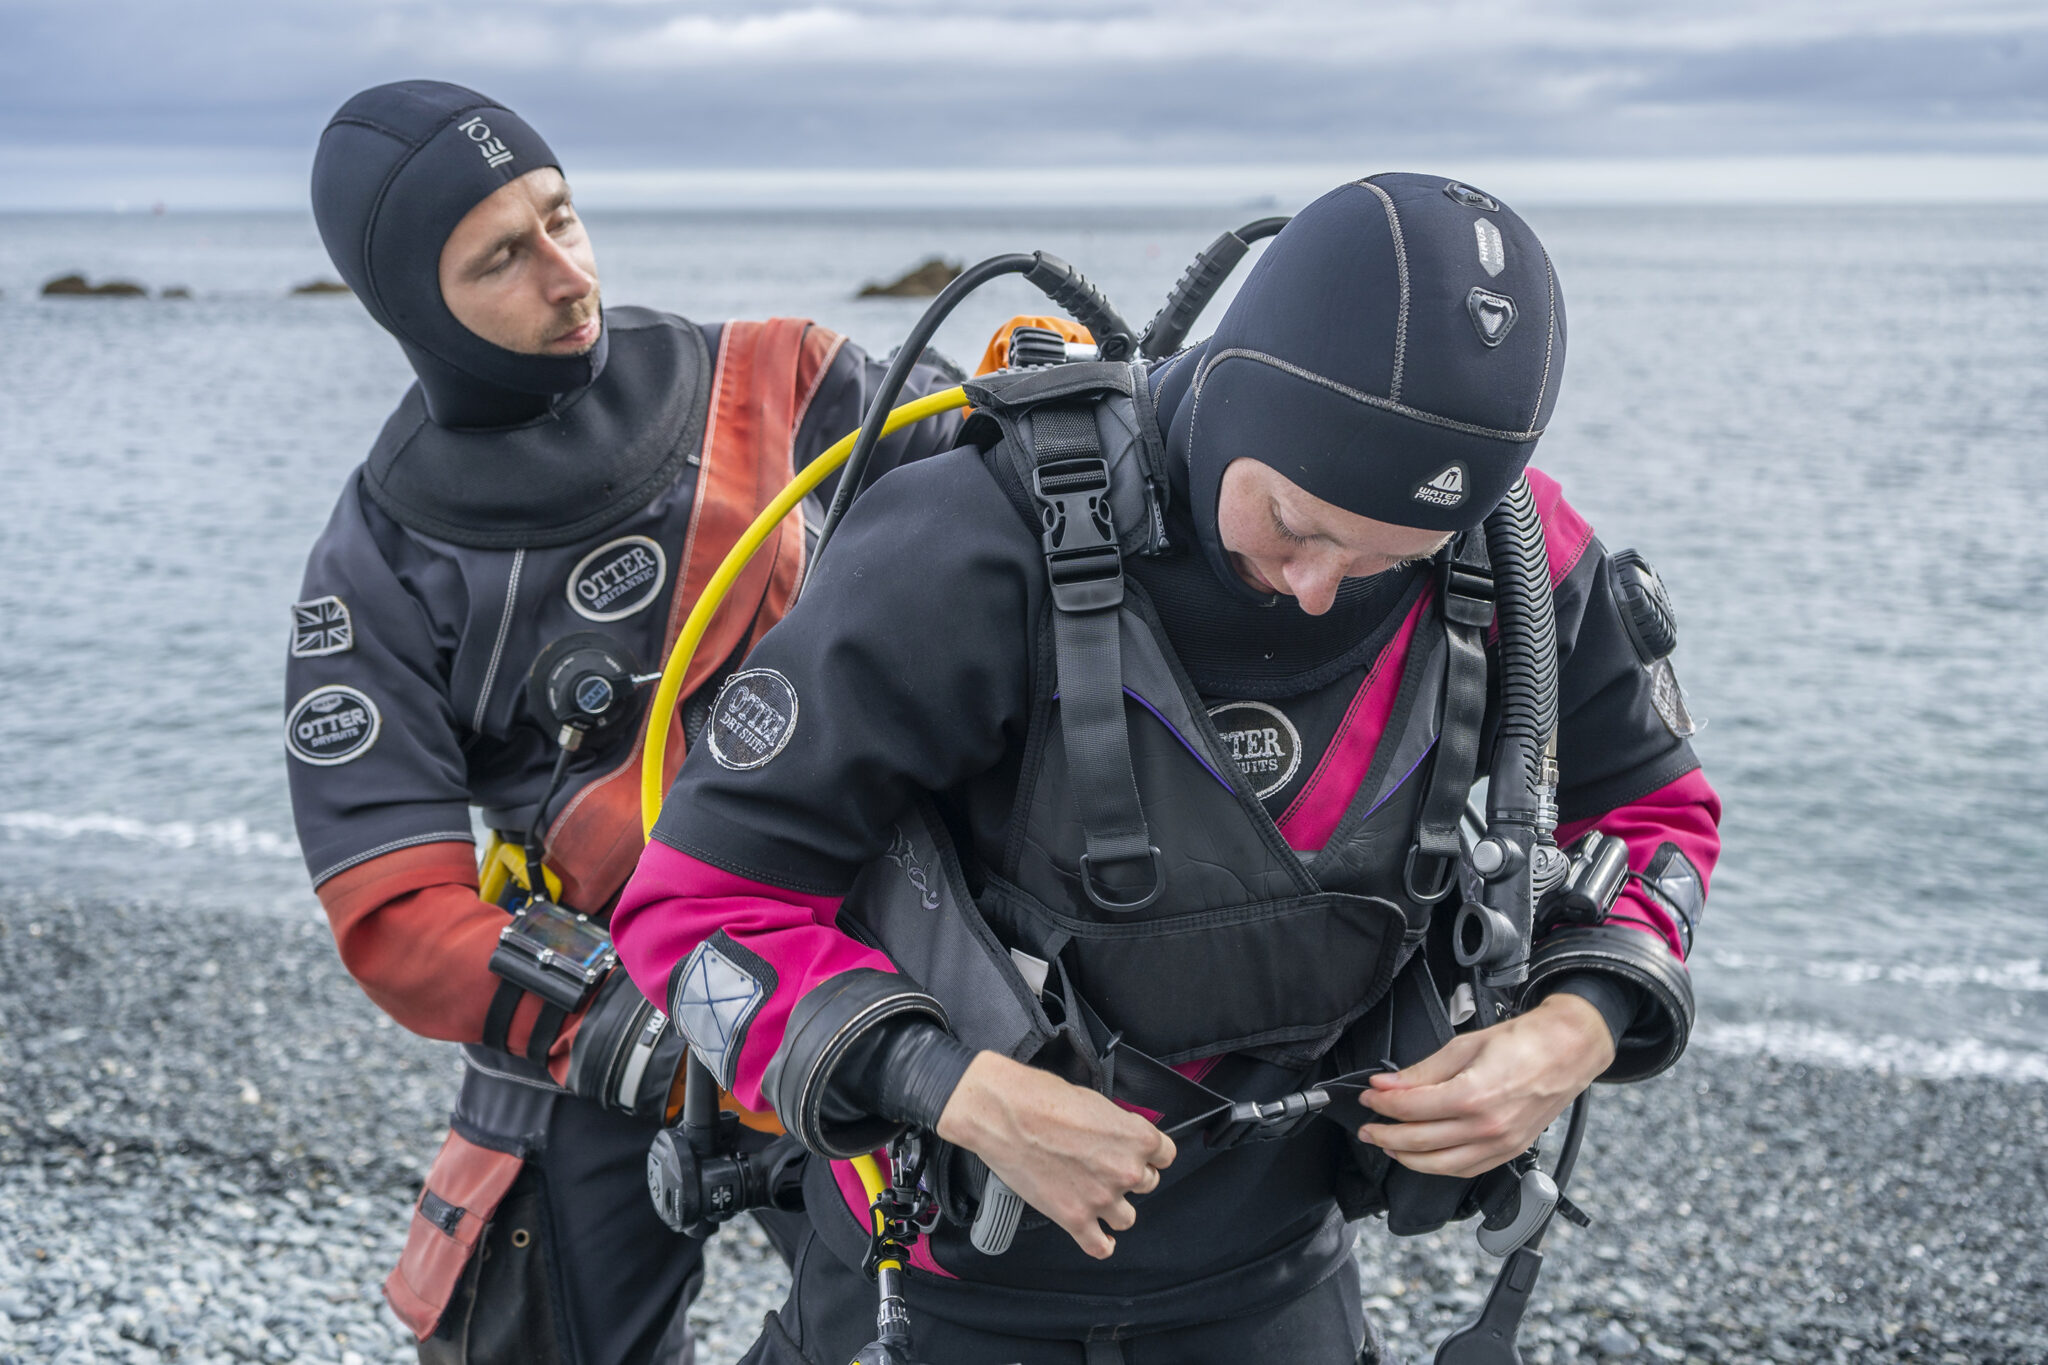 Two divers wearing dry suits getting ready